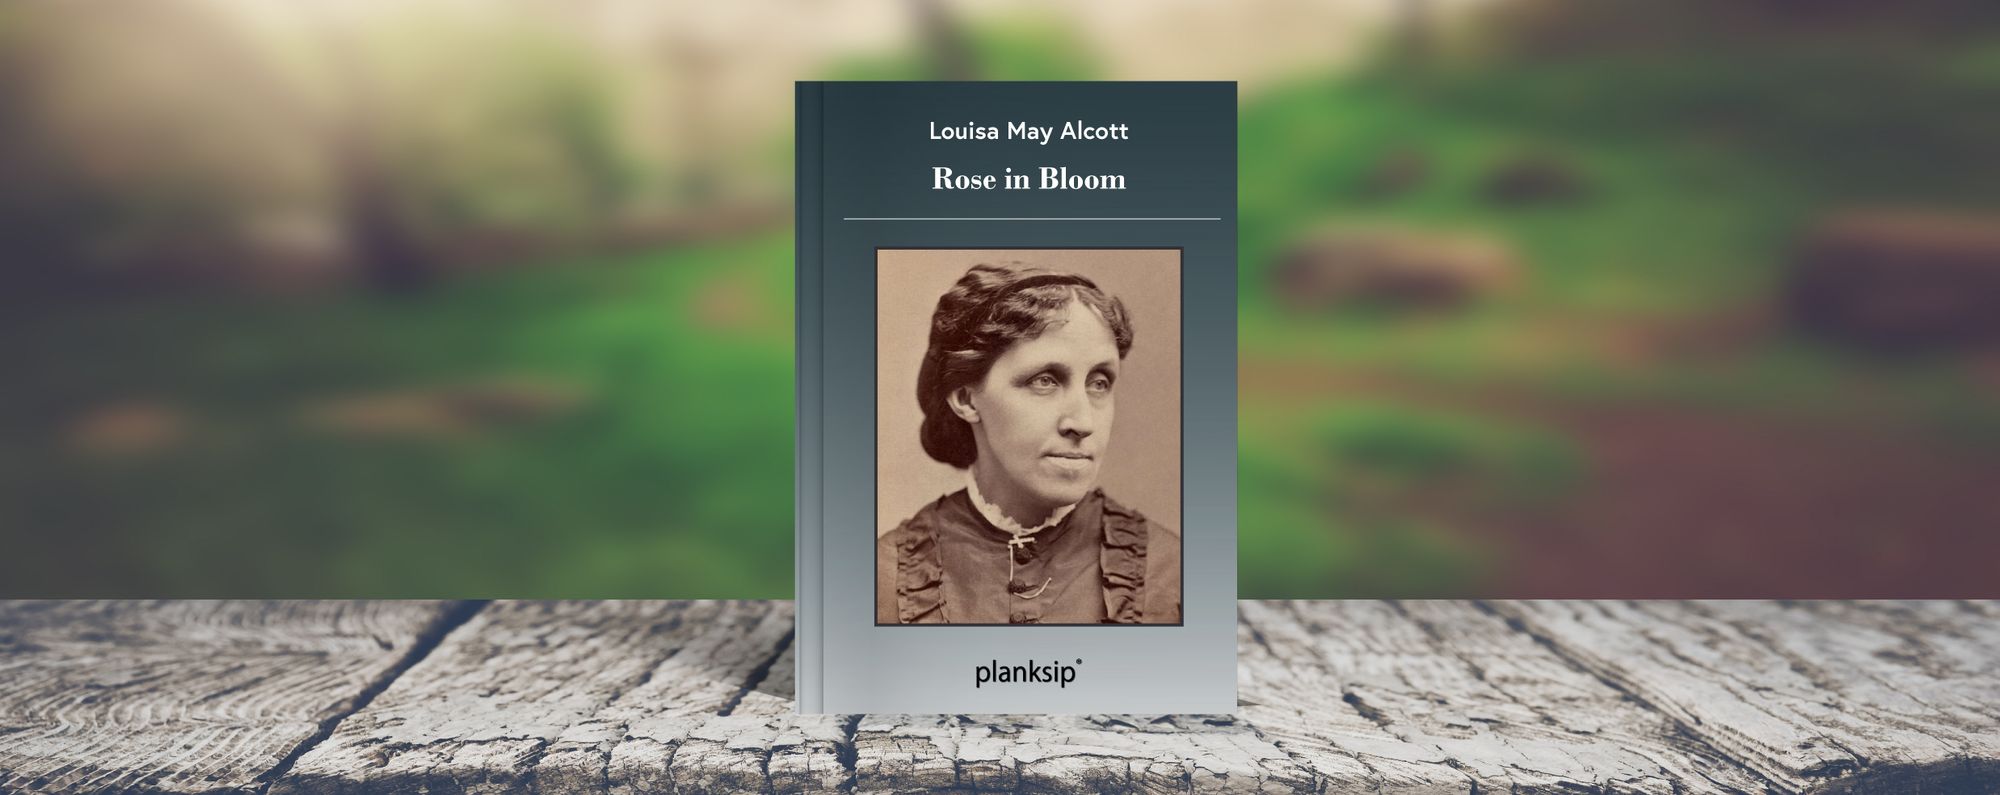 Rose in Bloom by Louisa May Alcott (1832-1888). Published by planksip